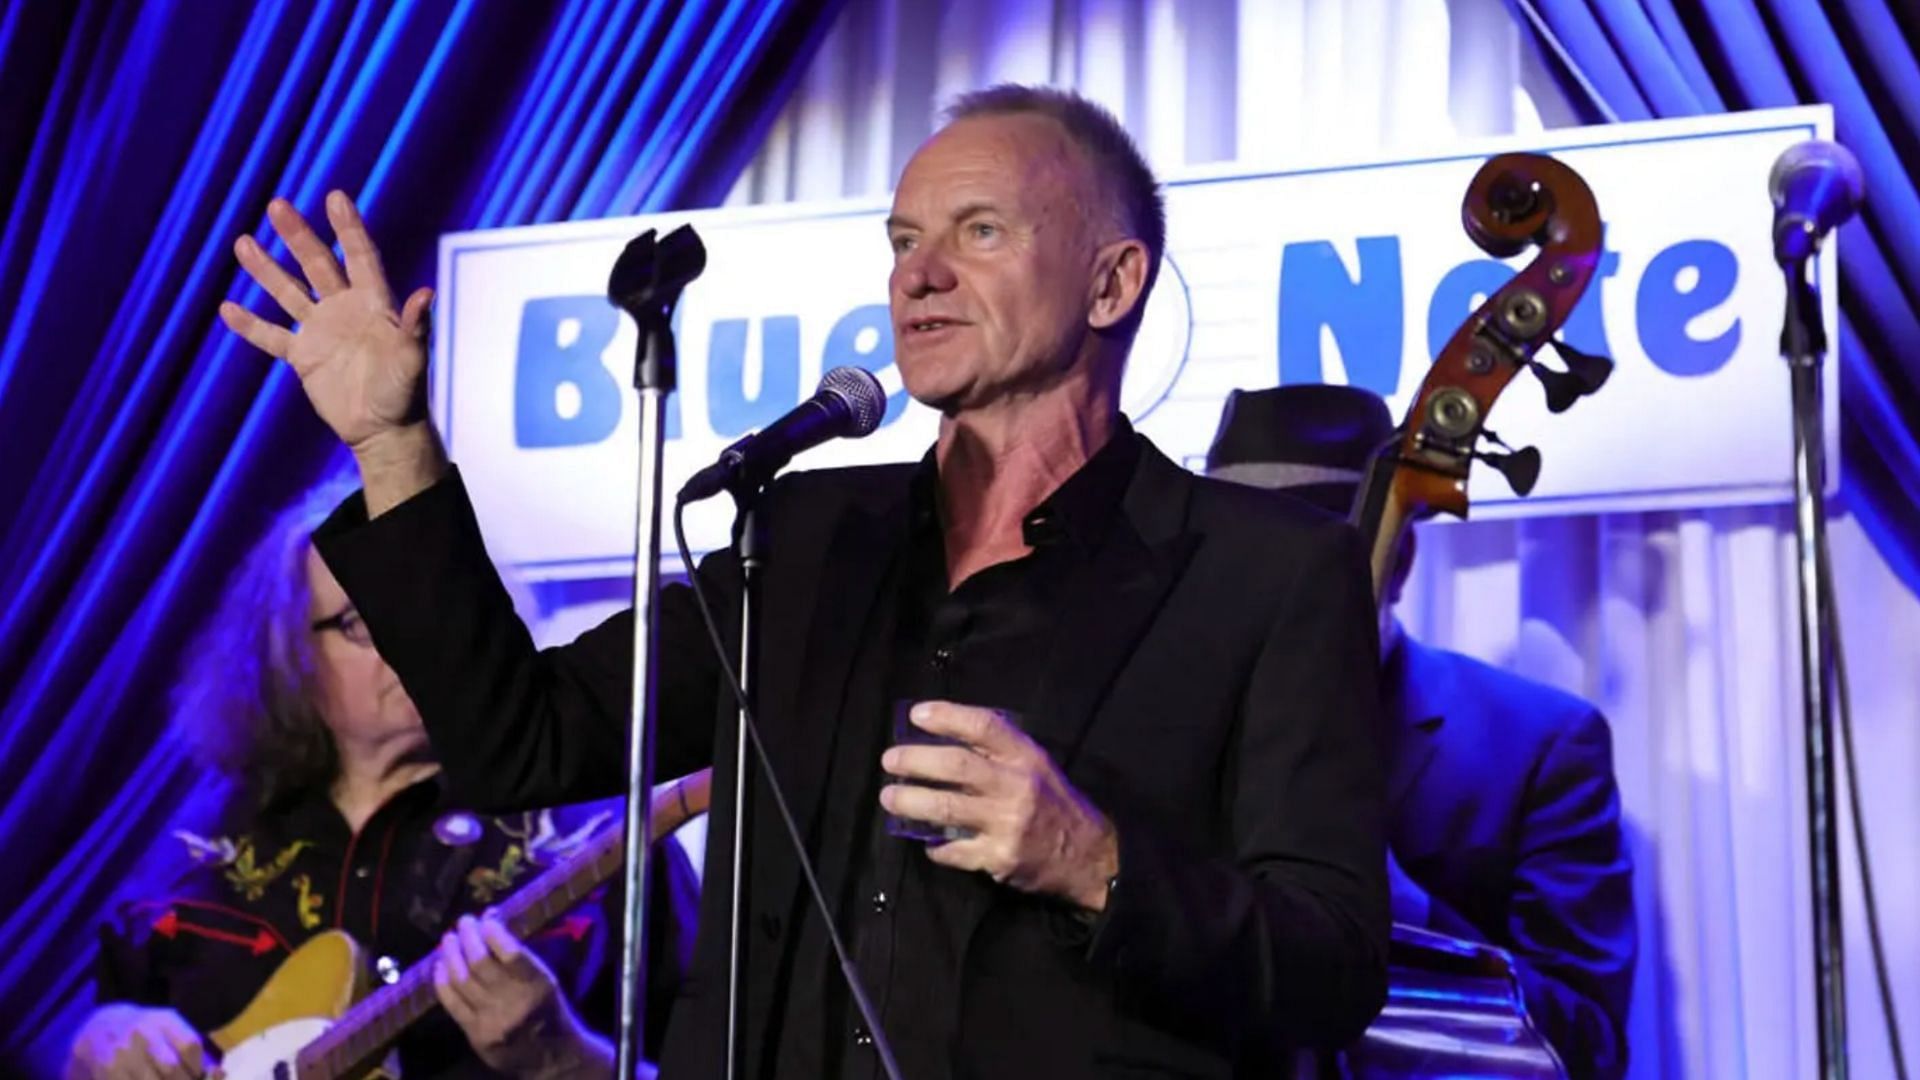 Sting Kuala Lumpur concert Tickets, presale, price, where to buy and more